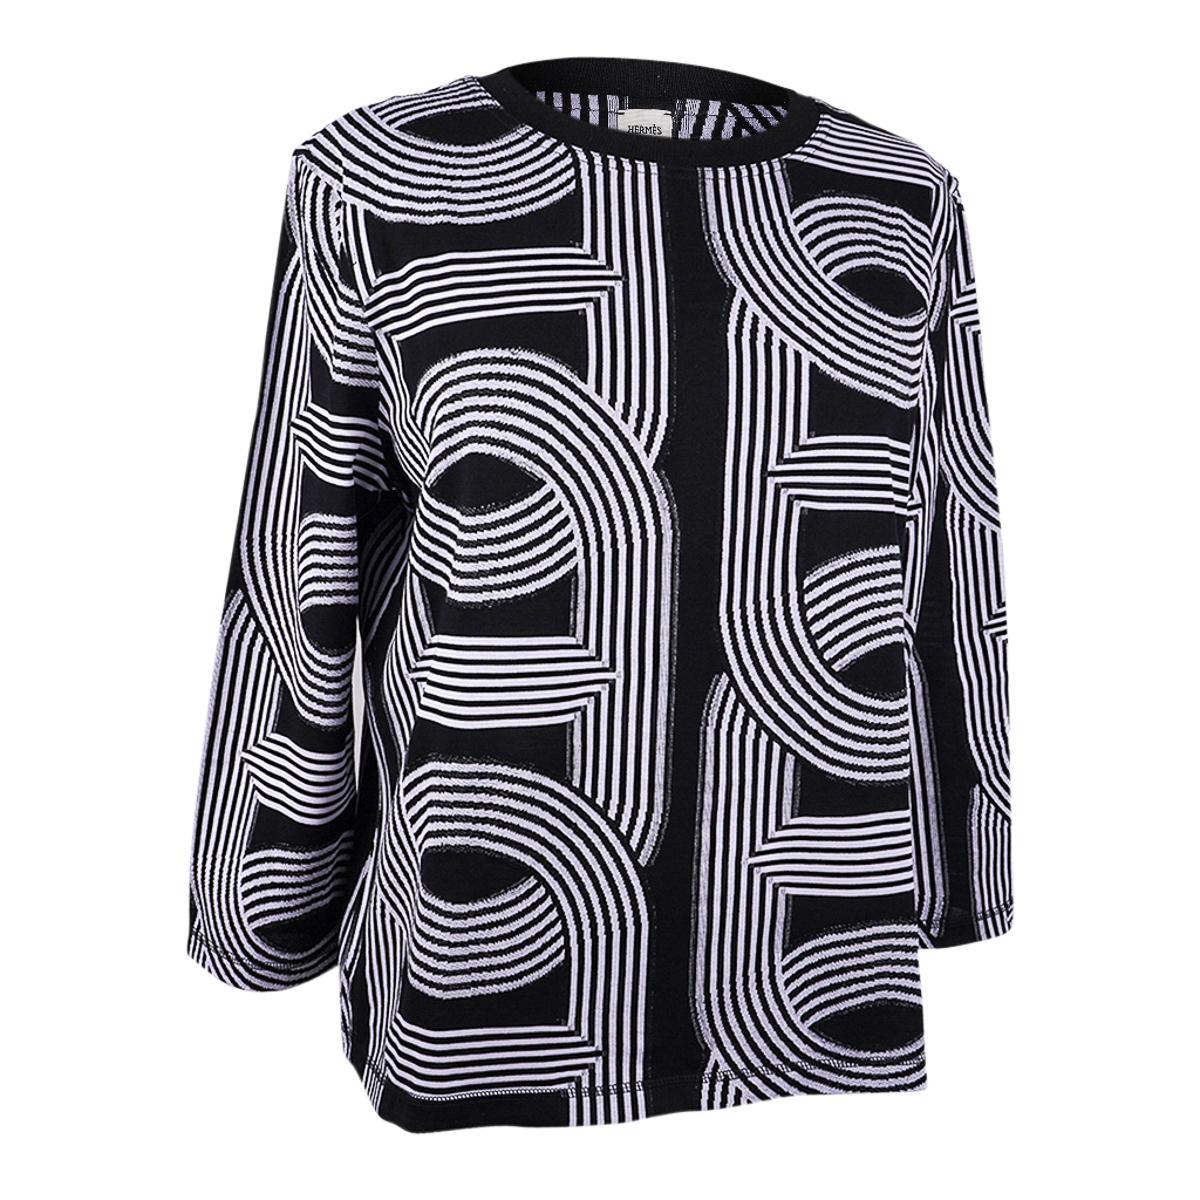 Mightychic offers an Hermes Jacquard Circuit 24 Maxi top feature in black and white.
Straight style top in a jacquard jersey.
Three quarter (3/4) length sleeves.
Black ribbed neckline.
Chic, stylish and easy to pair with a myriad of pieces in your